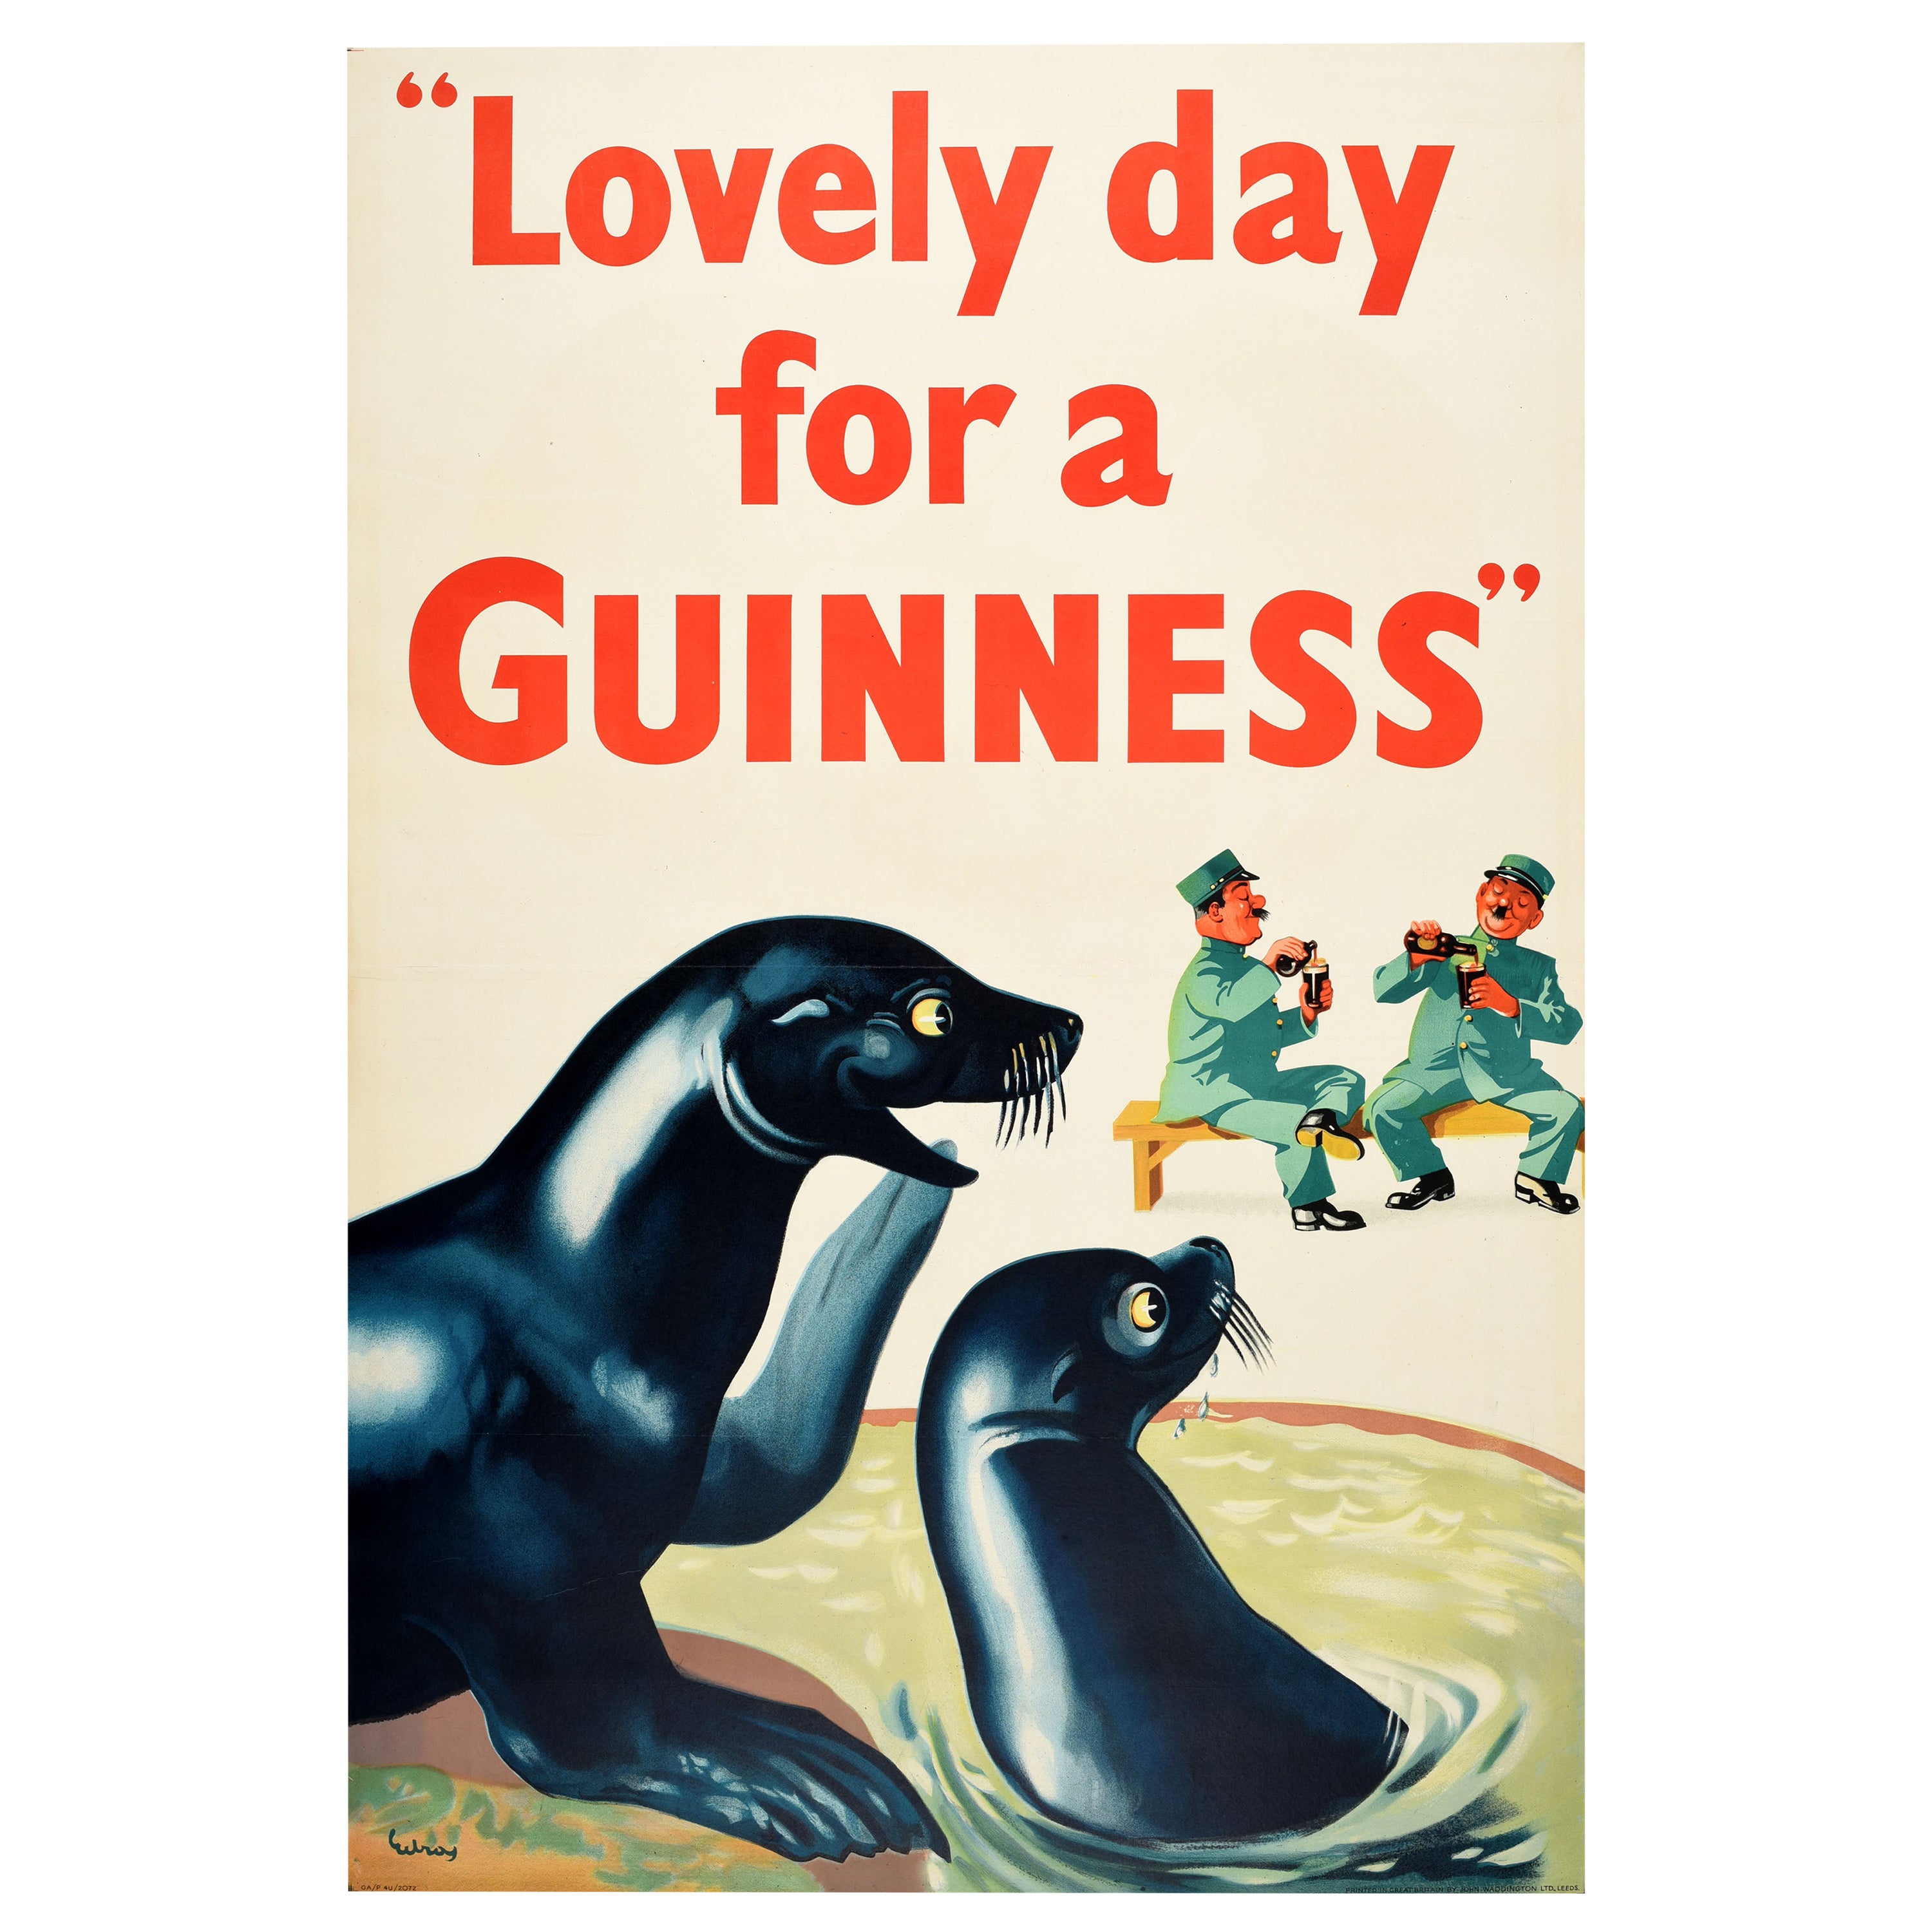 Original Vintage Advertising Poster Lovely Day For A Guinness Seal Gilroy Design For Sale